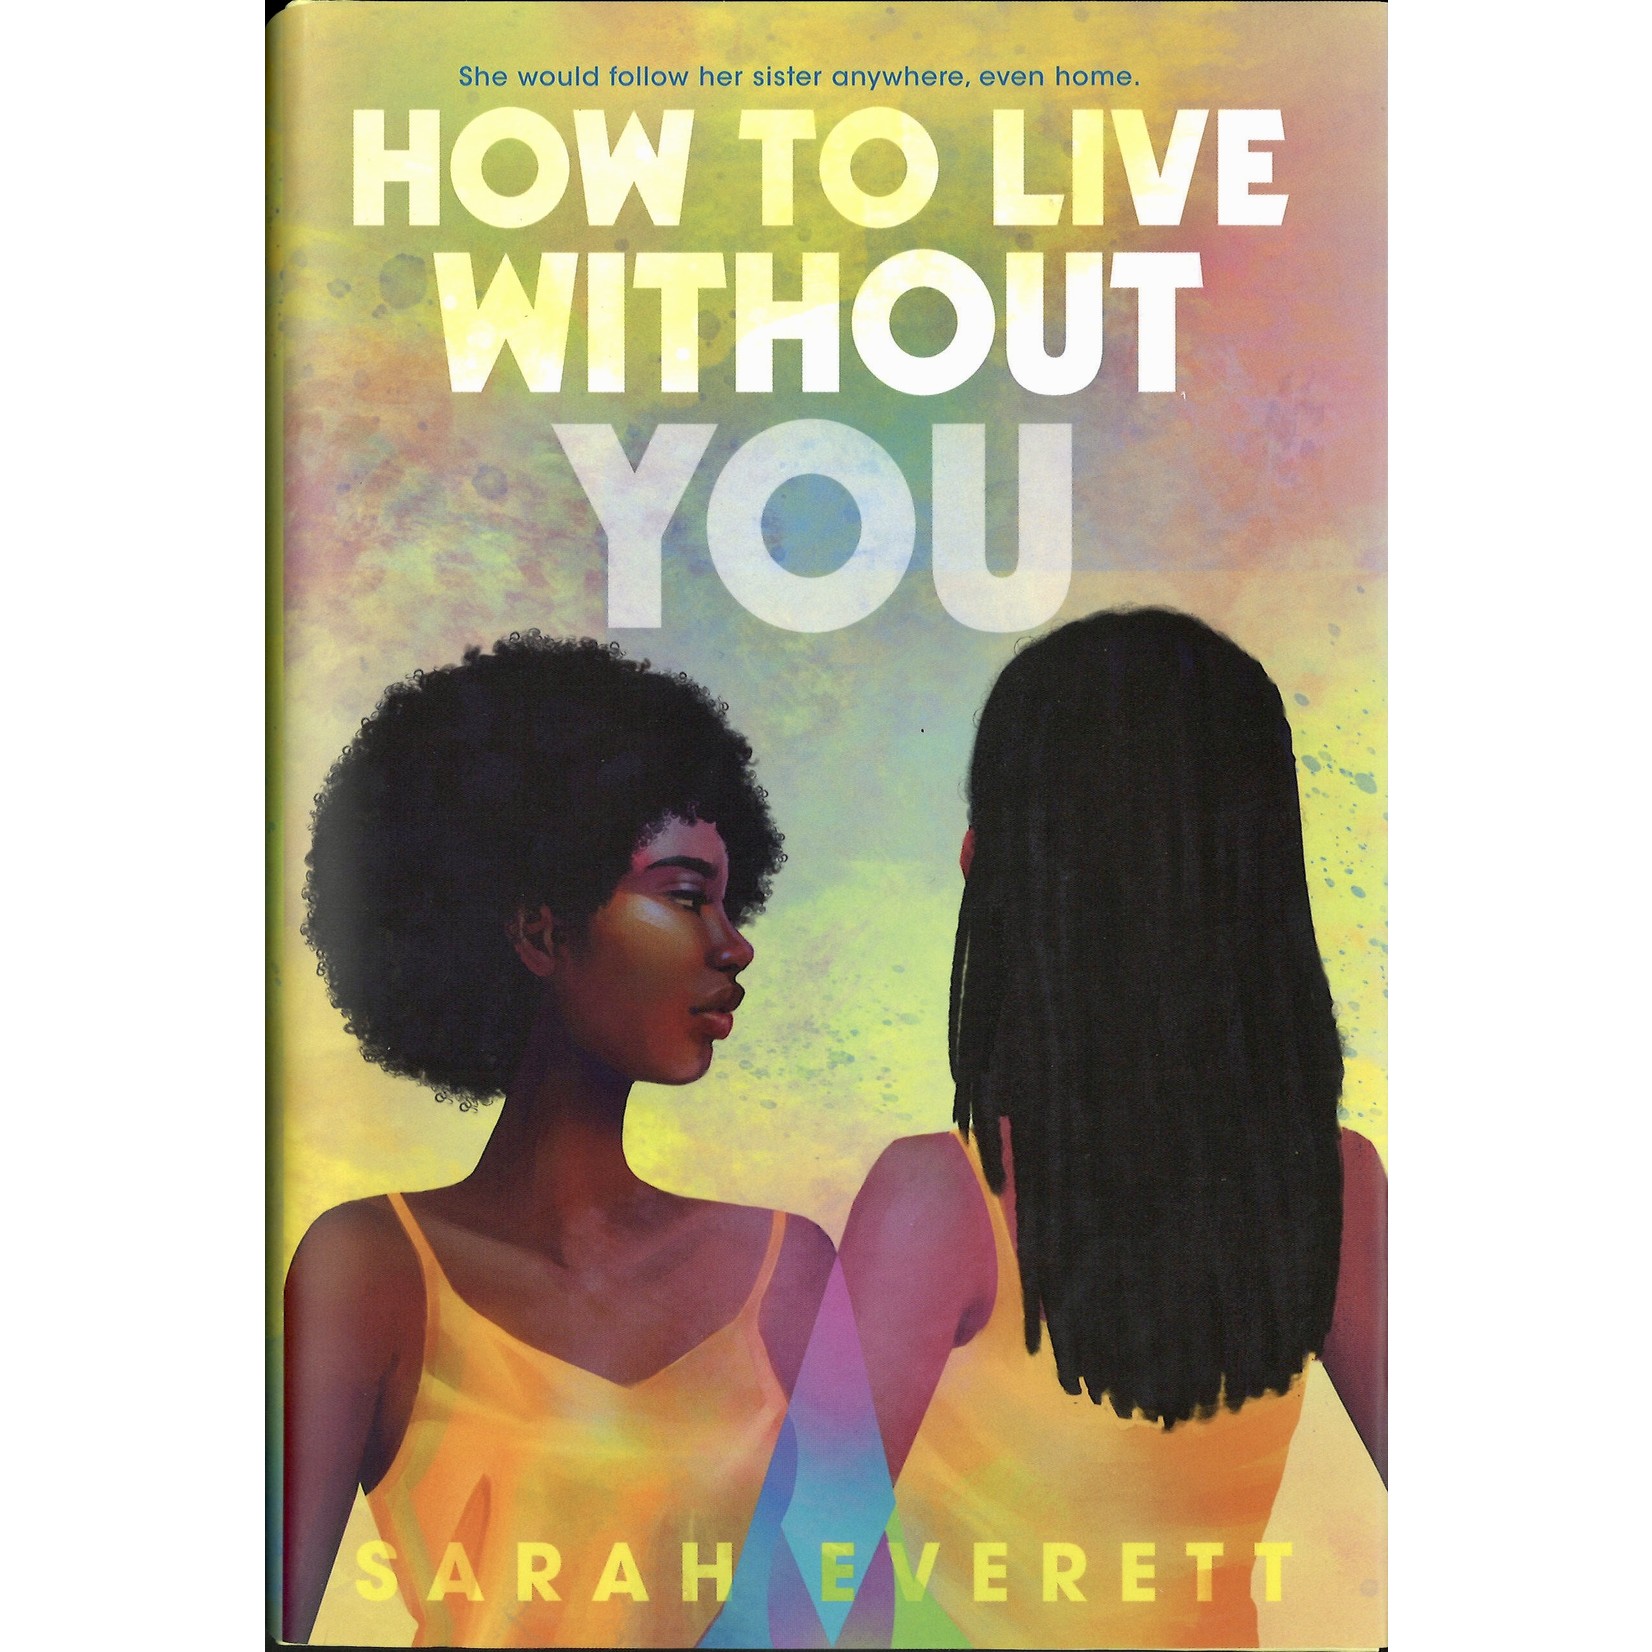 HOW TO LIVE WITHOUT YOU